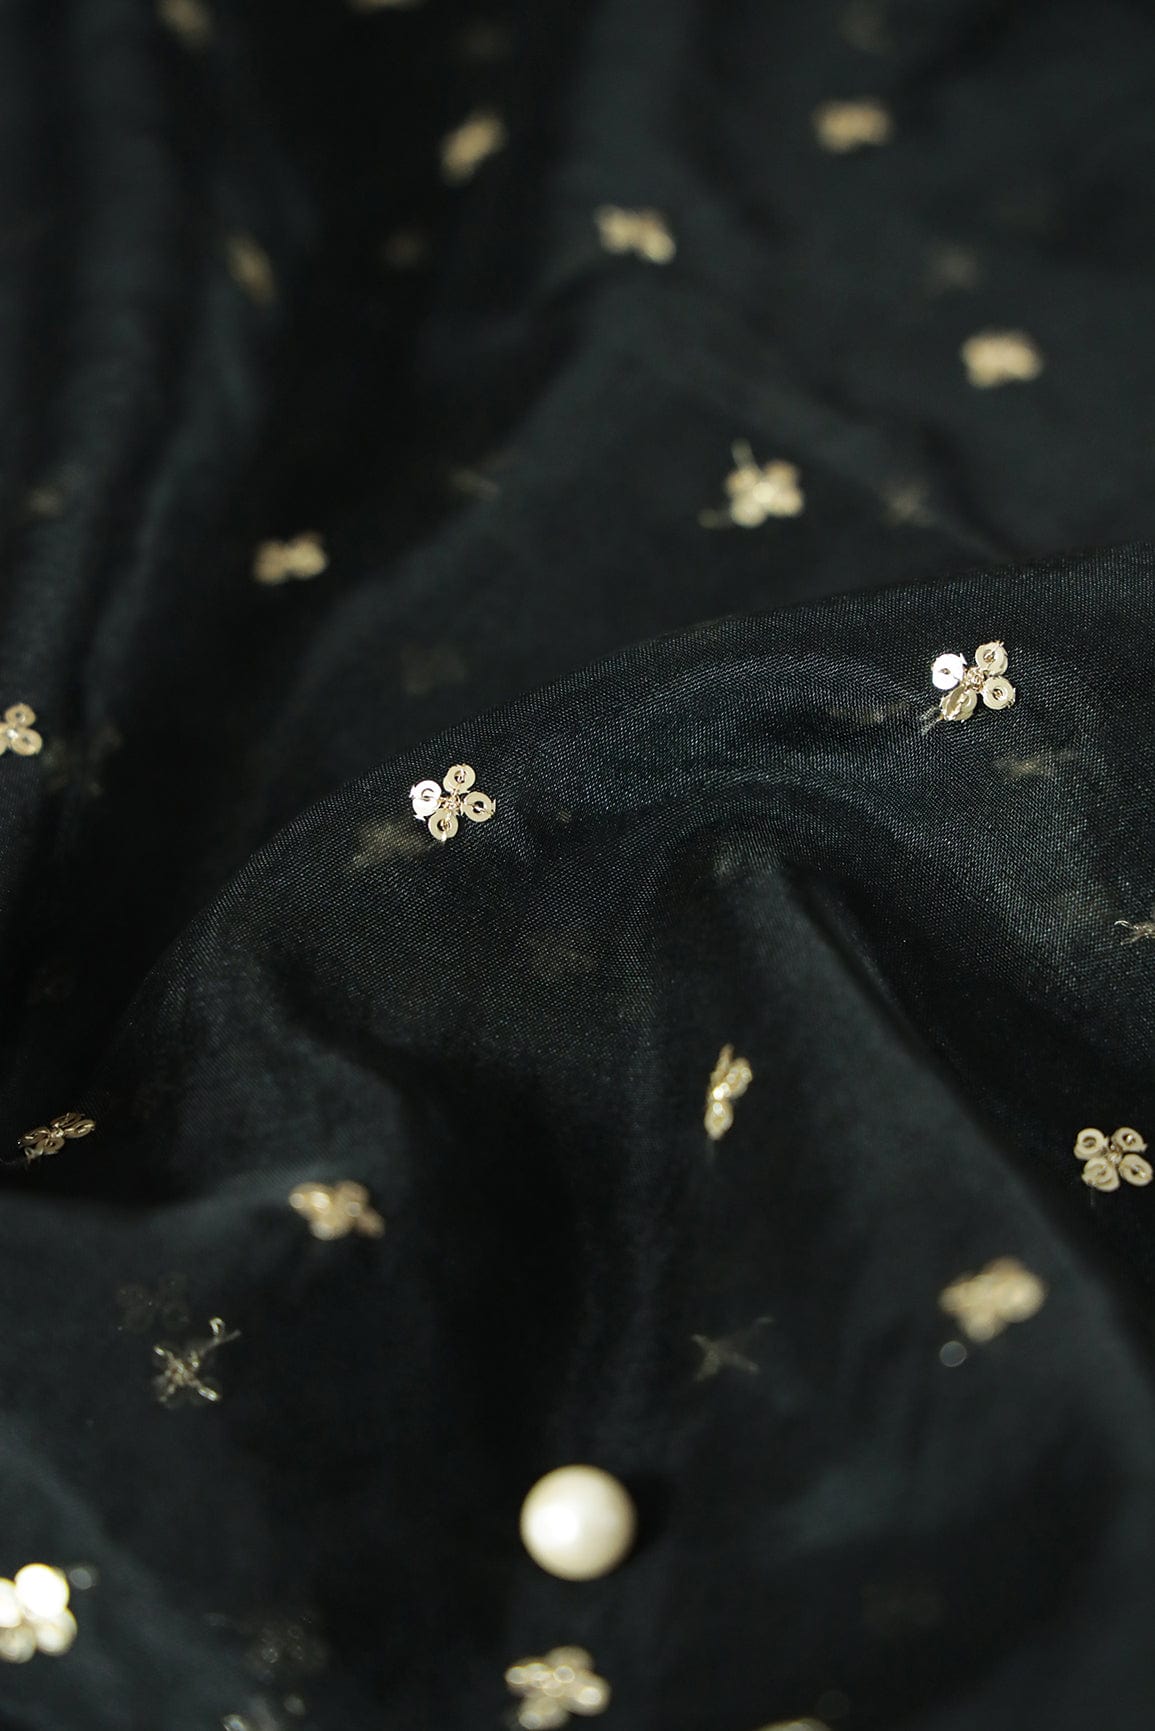 doeraa Embroidery Fabrics Gold Sequins Small Motif Embroidery Work On Black Organza Fabric